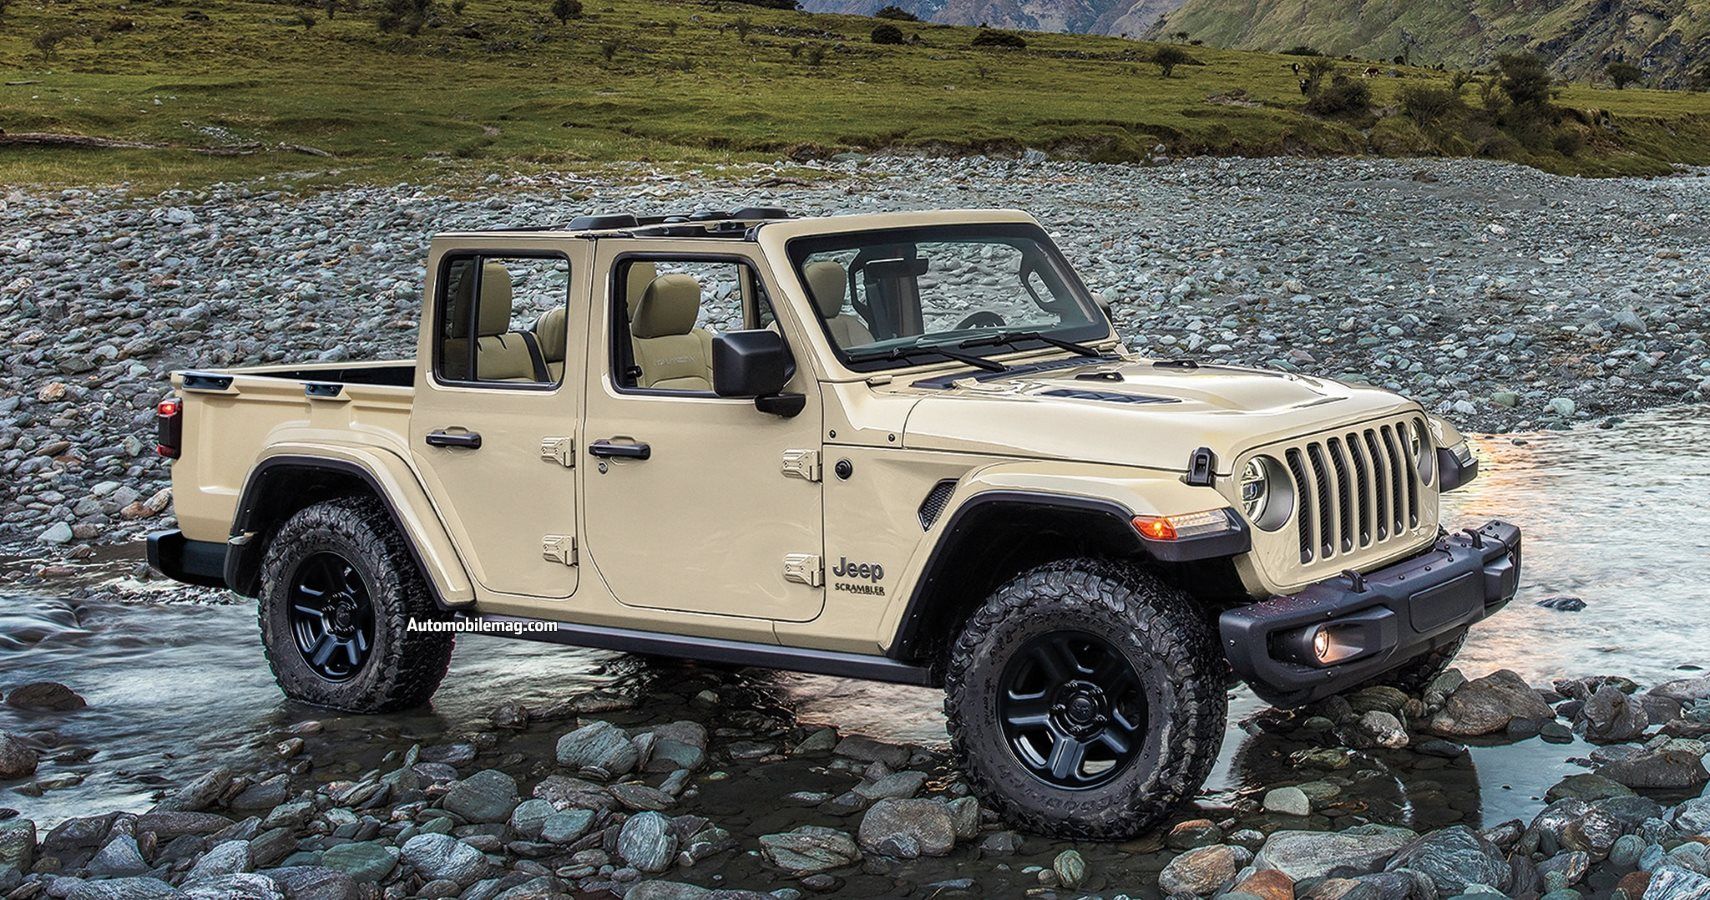 Jeep Wrangler Pickup Gets Possible Off-Road Trim